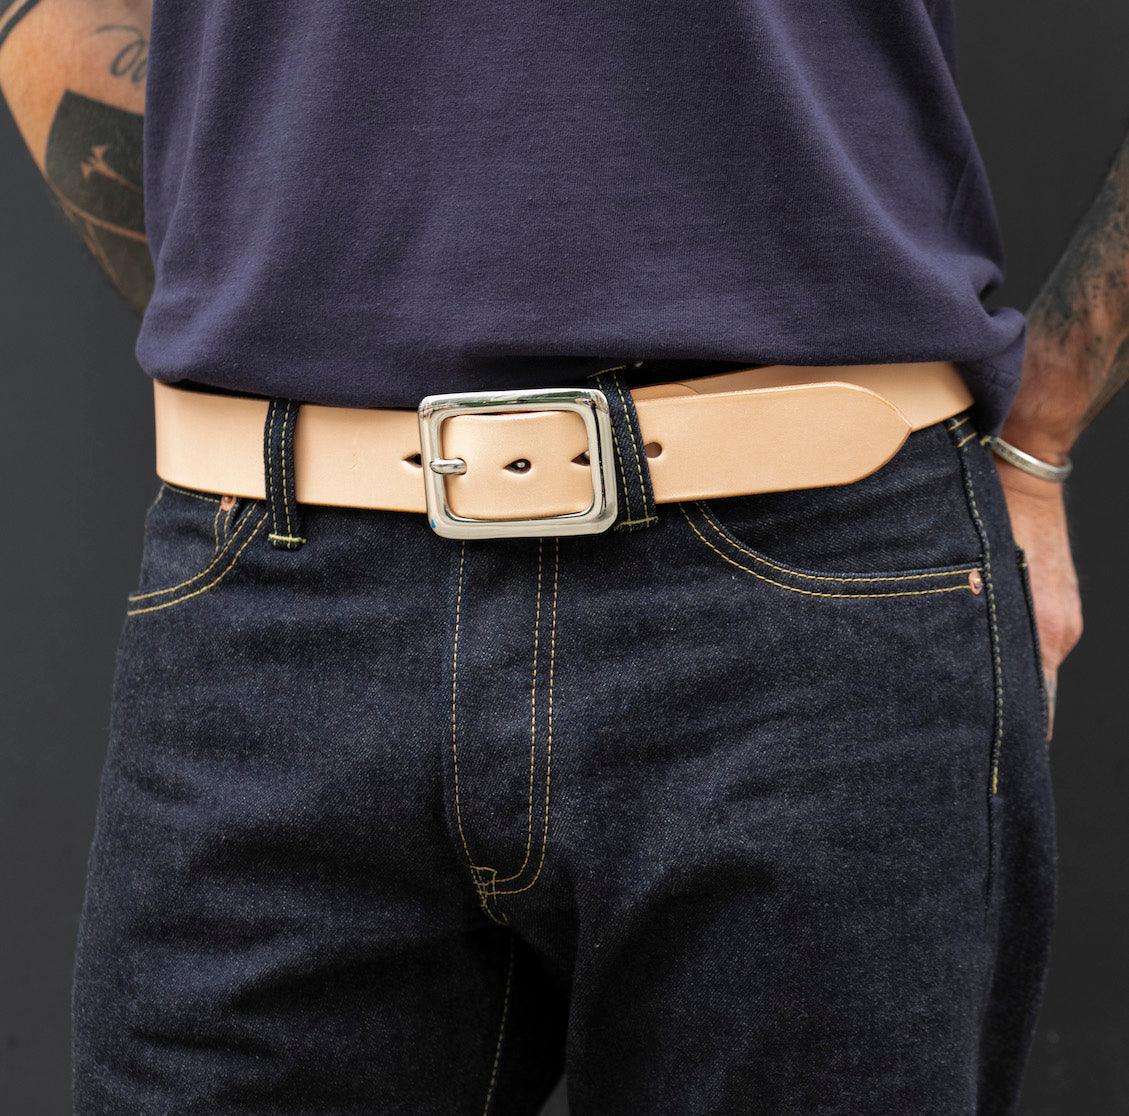 Image showing the IHB-08-NAT - Heavy Duty "Tochigi" Leather Belt With Nickel Plated Garrison Buckle - Natural which is a Belts described by the following info Accessories, Belts, Iron Heart, Released and sold on the IRON HEART GERMANY online store